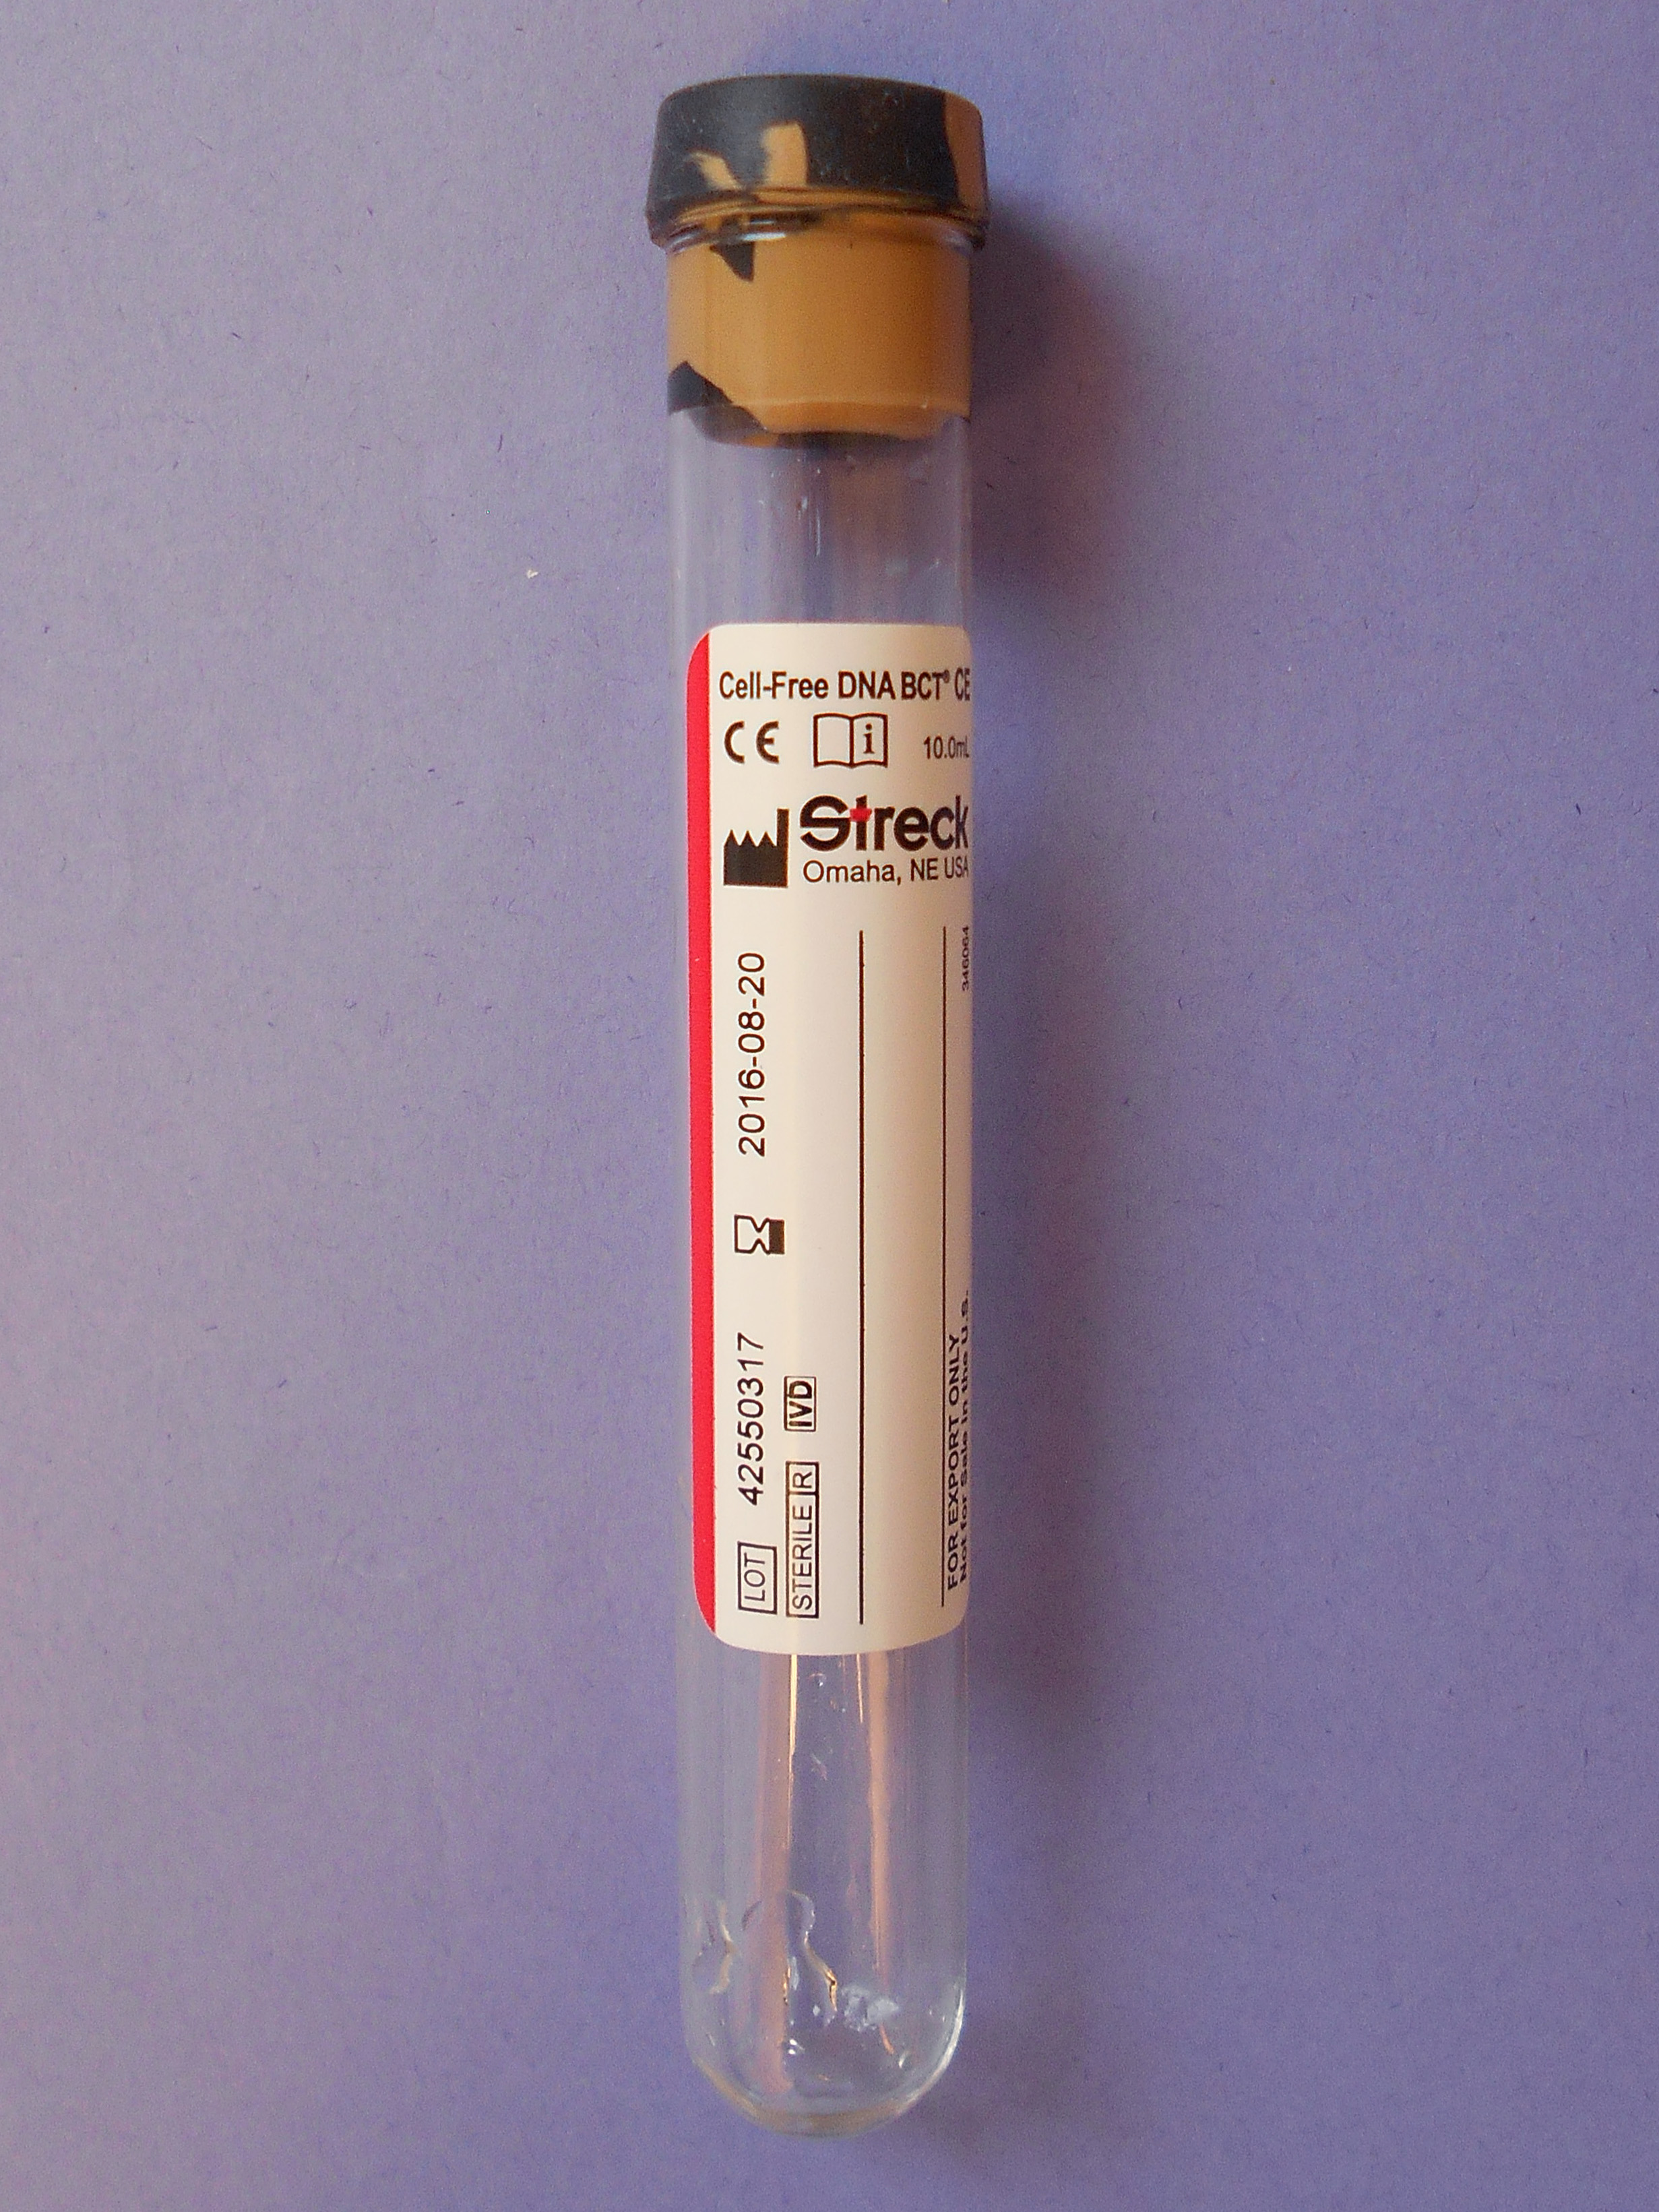 Cell-Free DNA BCT CE